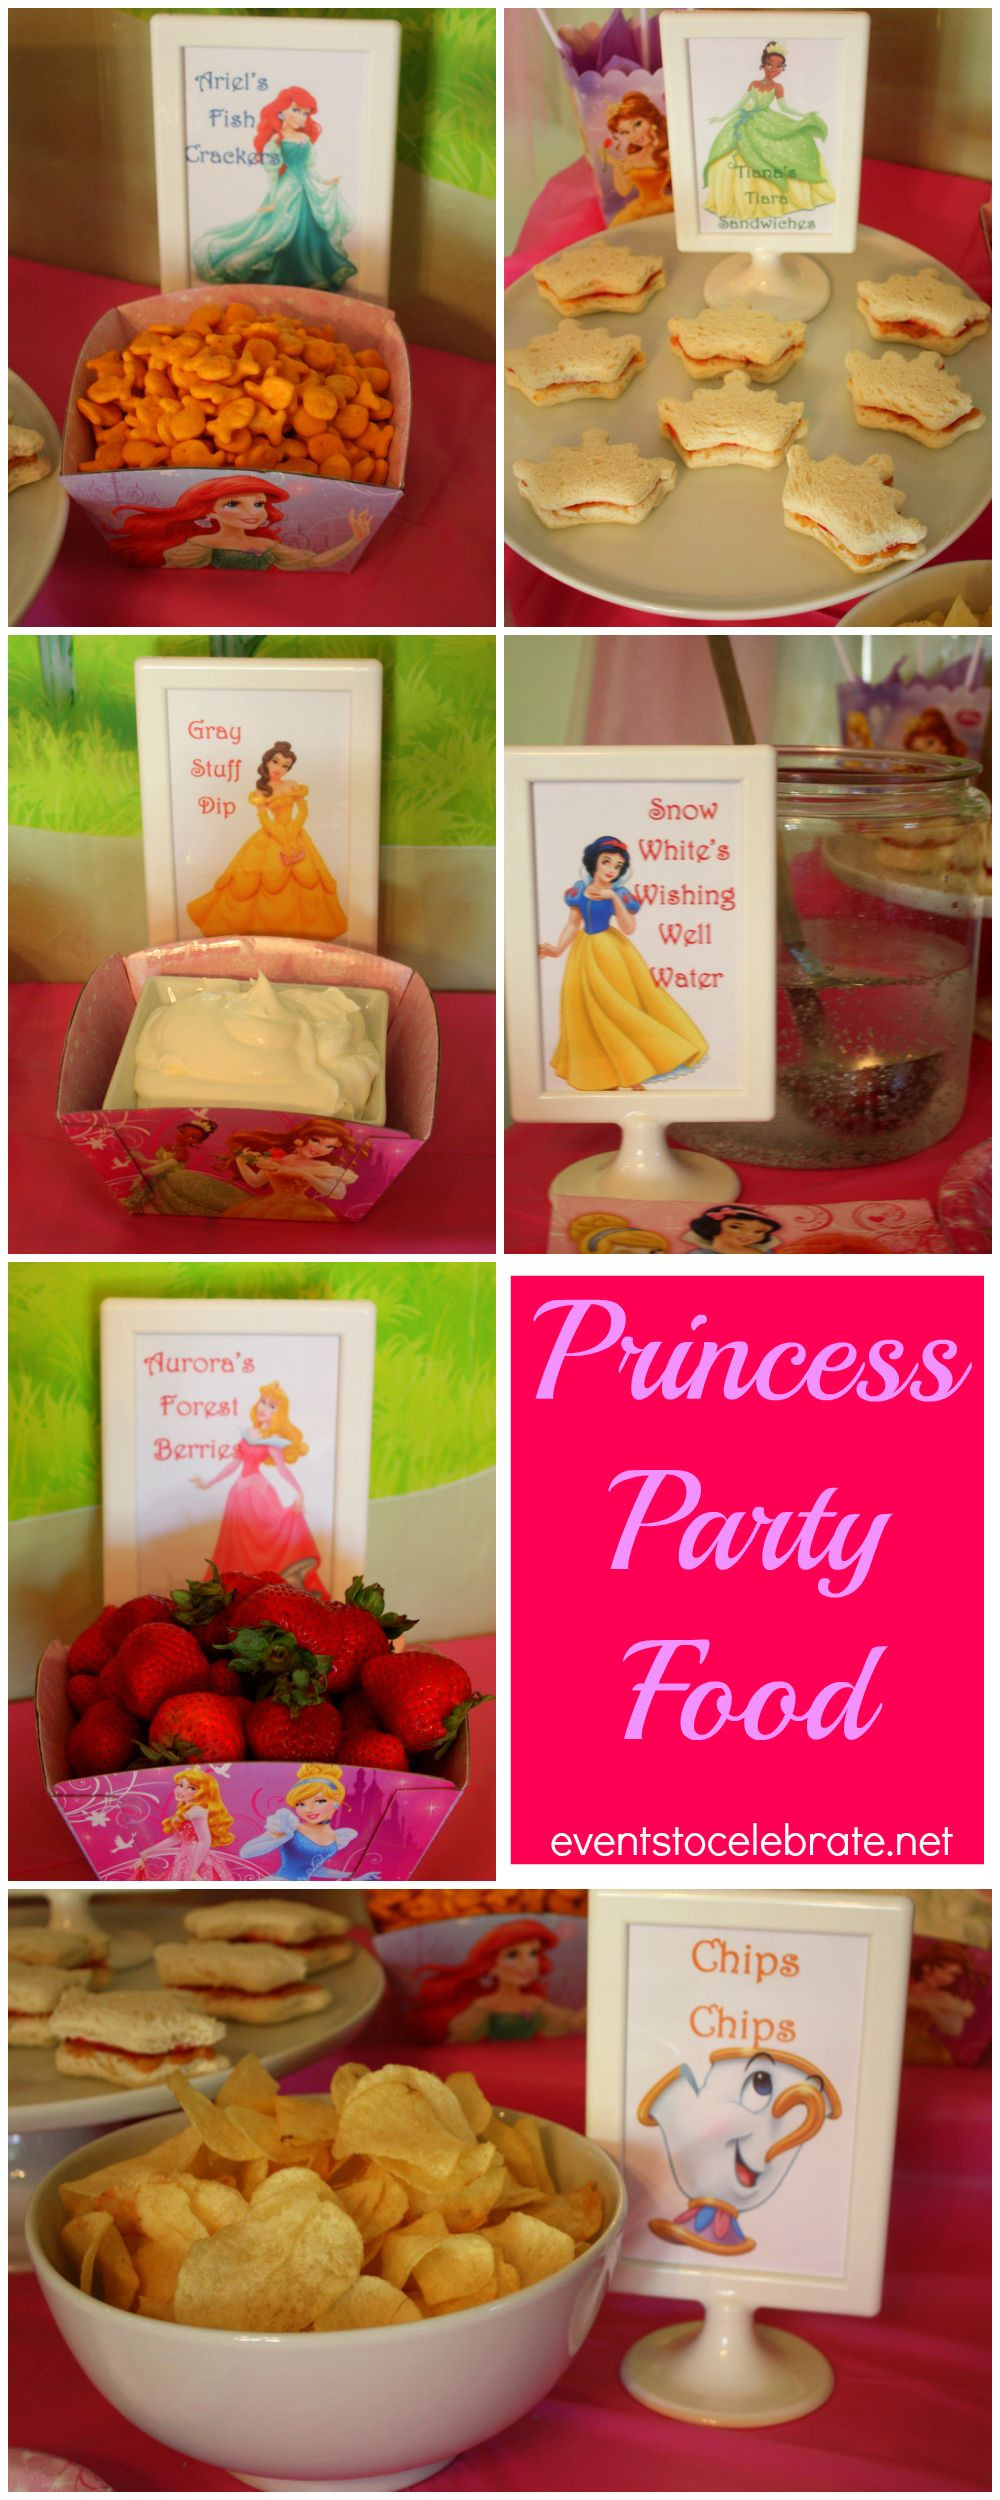 Princess Birthday Party Food Ideas
 Princess Birthday Party Food and Decorations